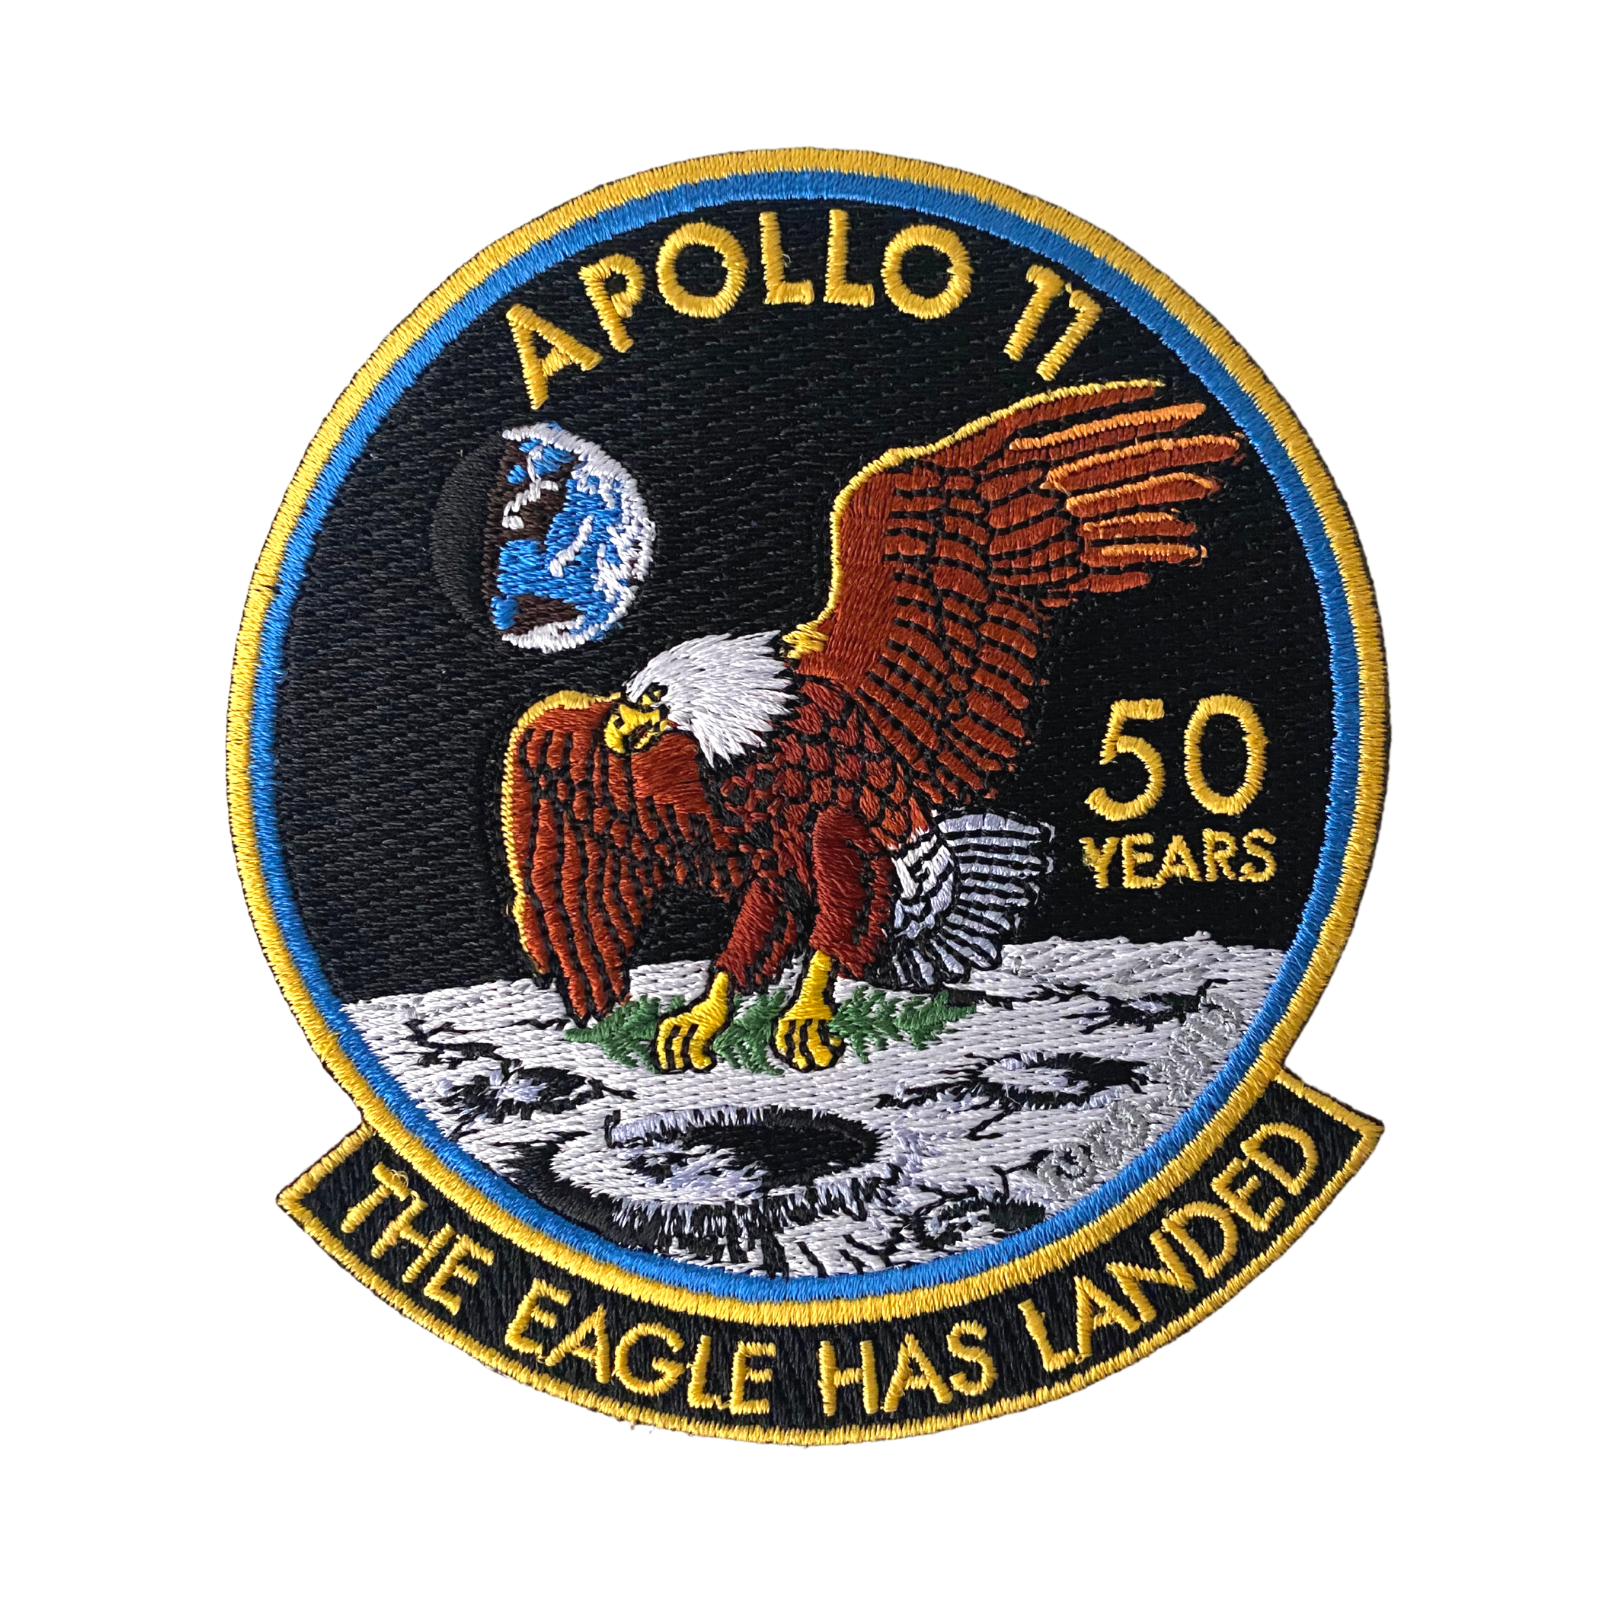 NASA's Apollo 11, 50th Anniversary "The Eagle Has Landed" Patch